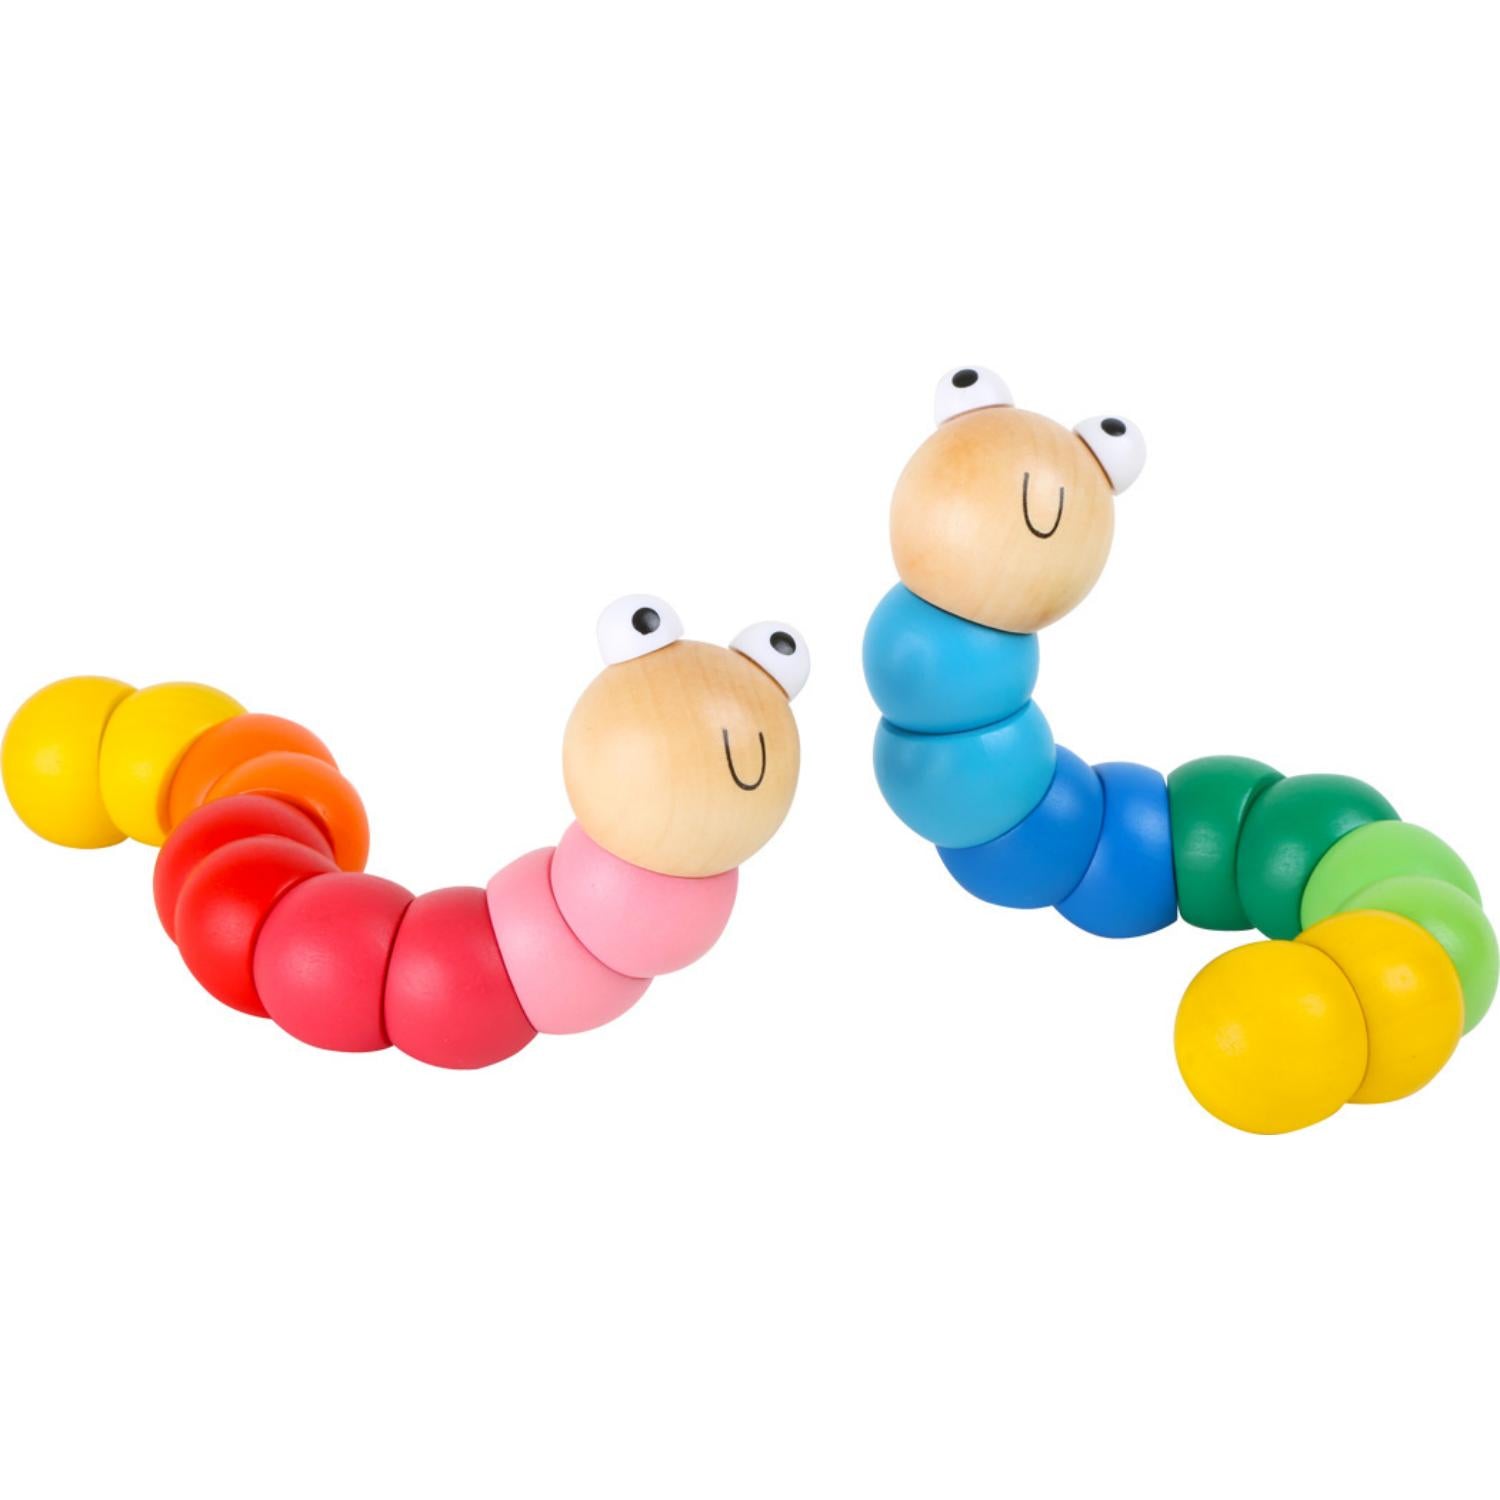 Red Wooden Bead Caterpillar | Baby Activity Toy | Front View together with Blue Wooden Bead Caterpillar | BeoVERDE.ie